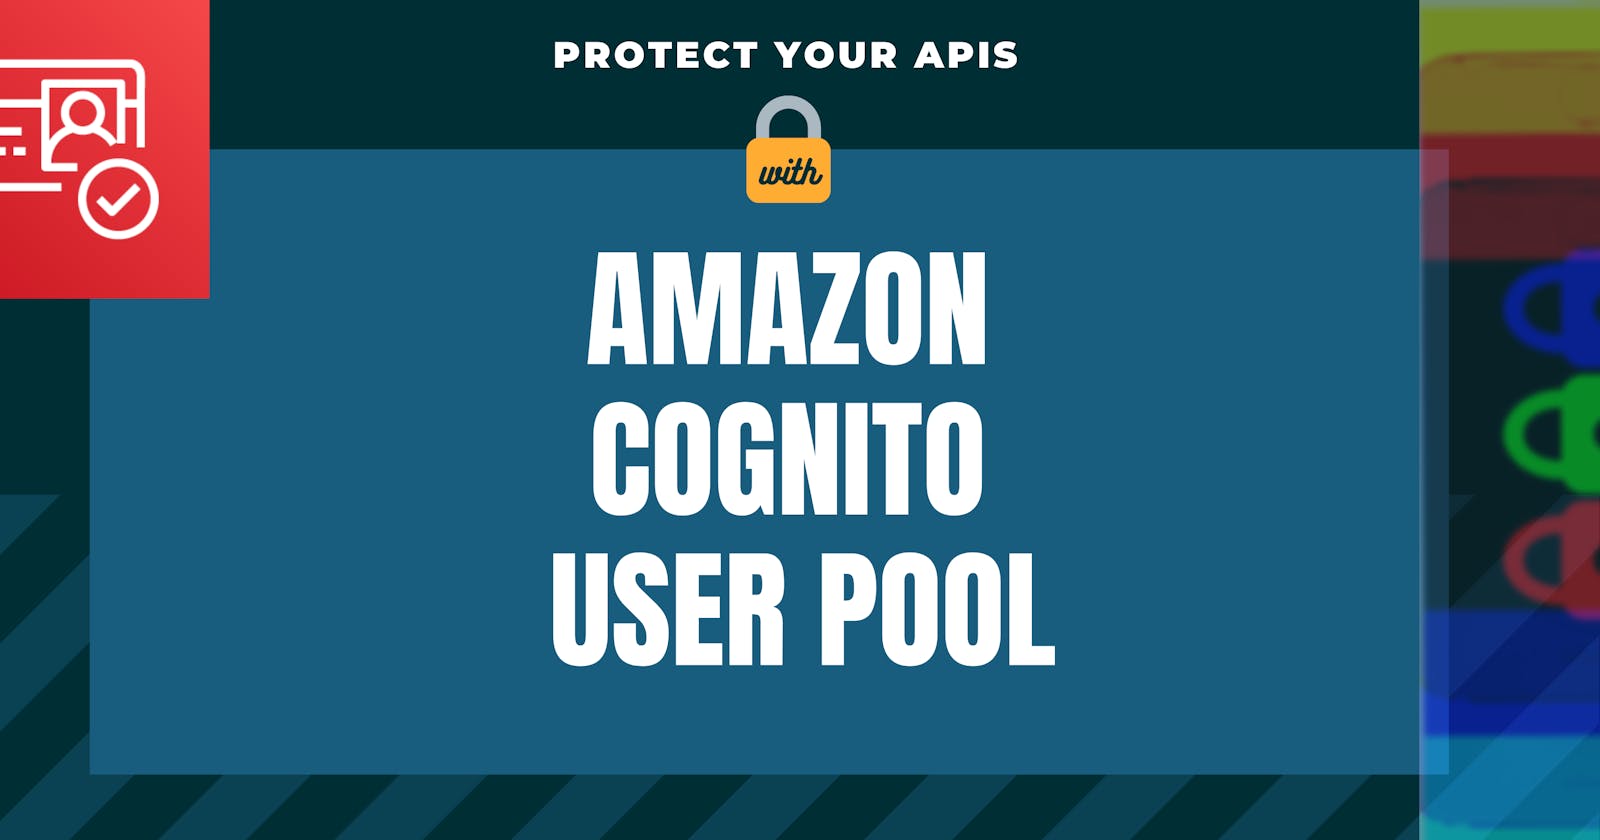 How to Protect APIs Using Amazon Cognito User Pool